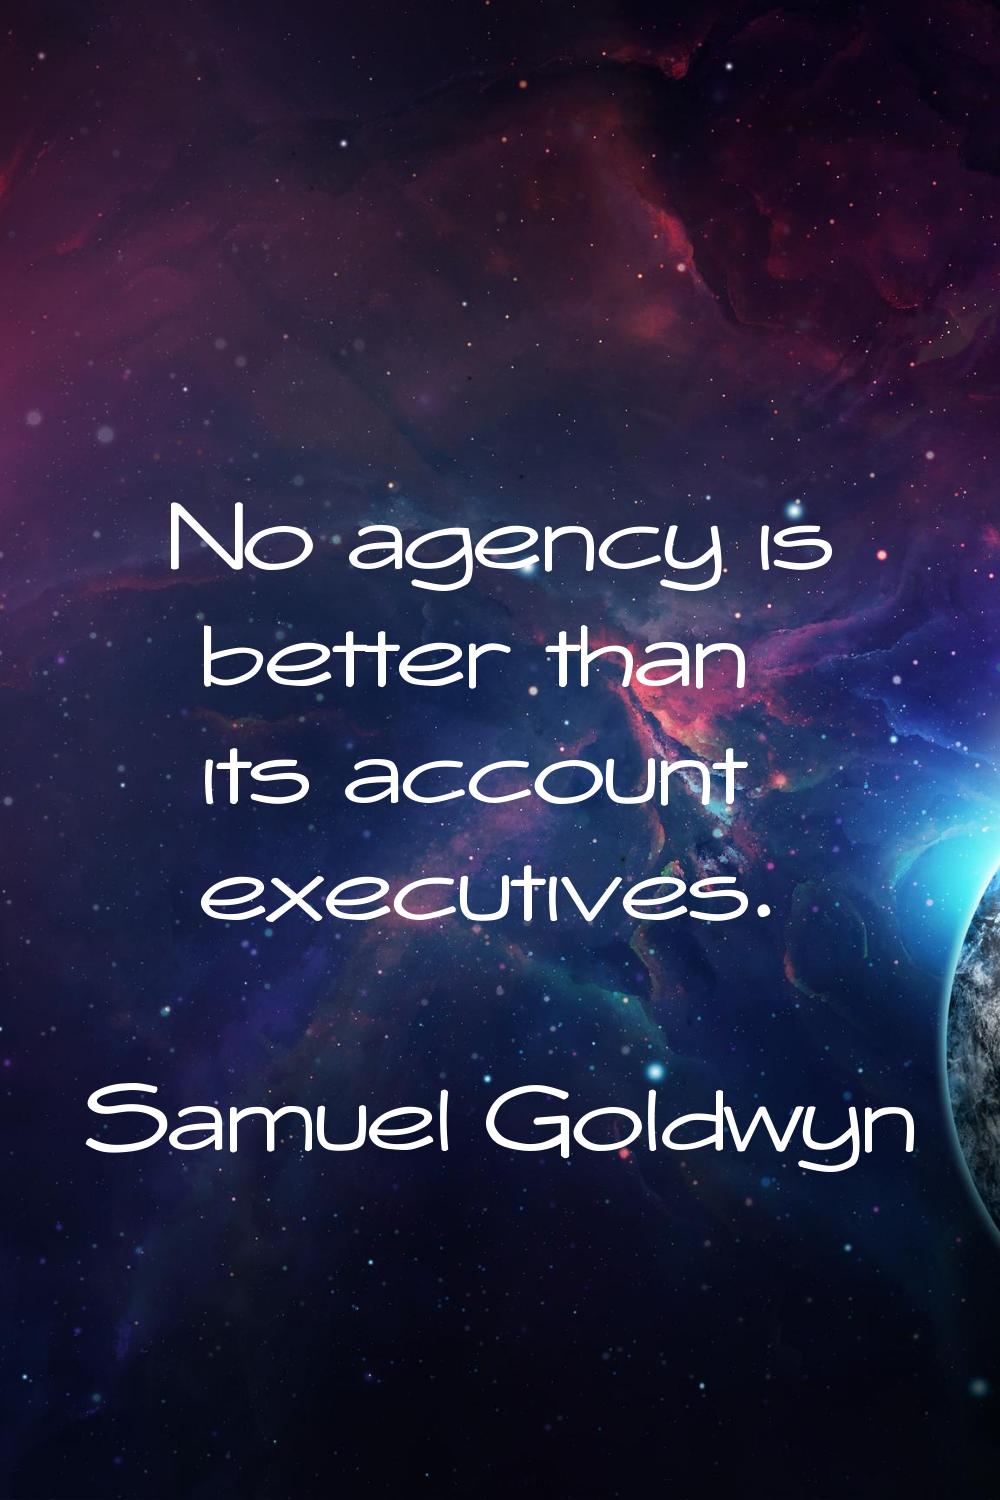 No agency is better than its account executives.